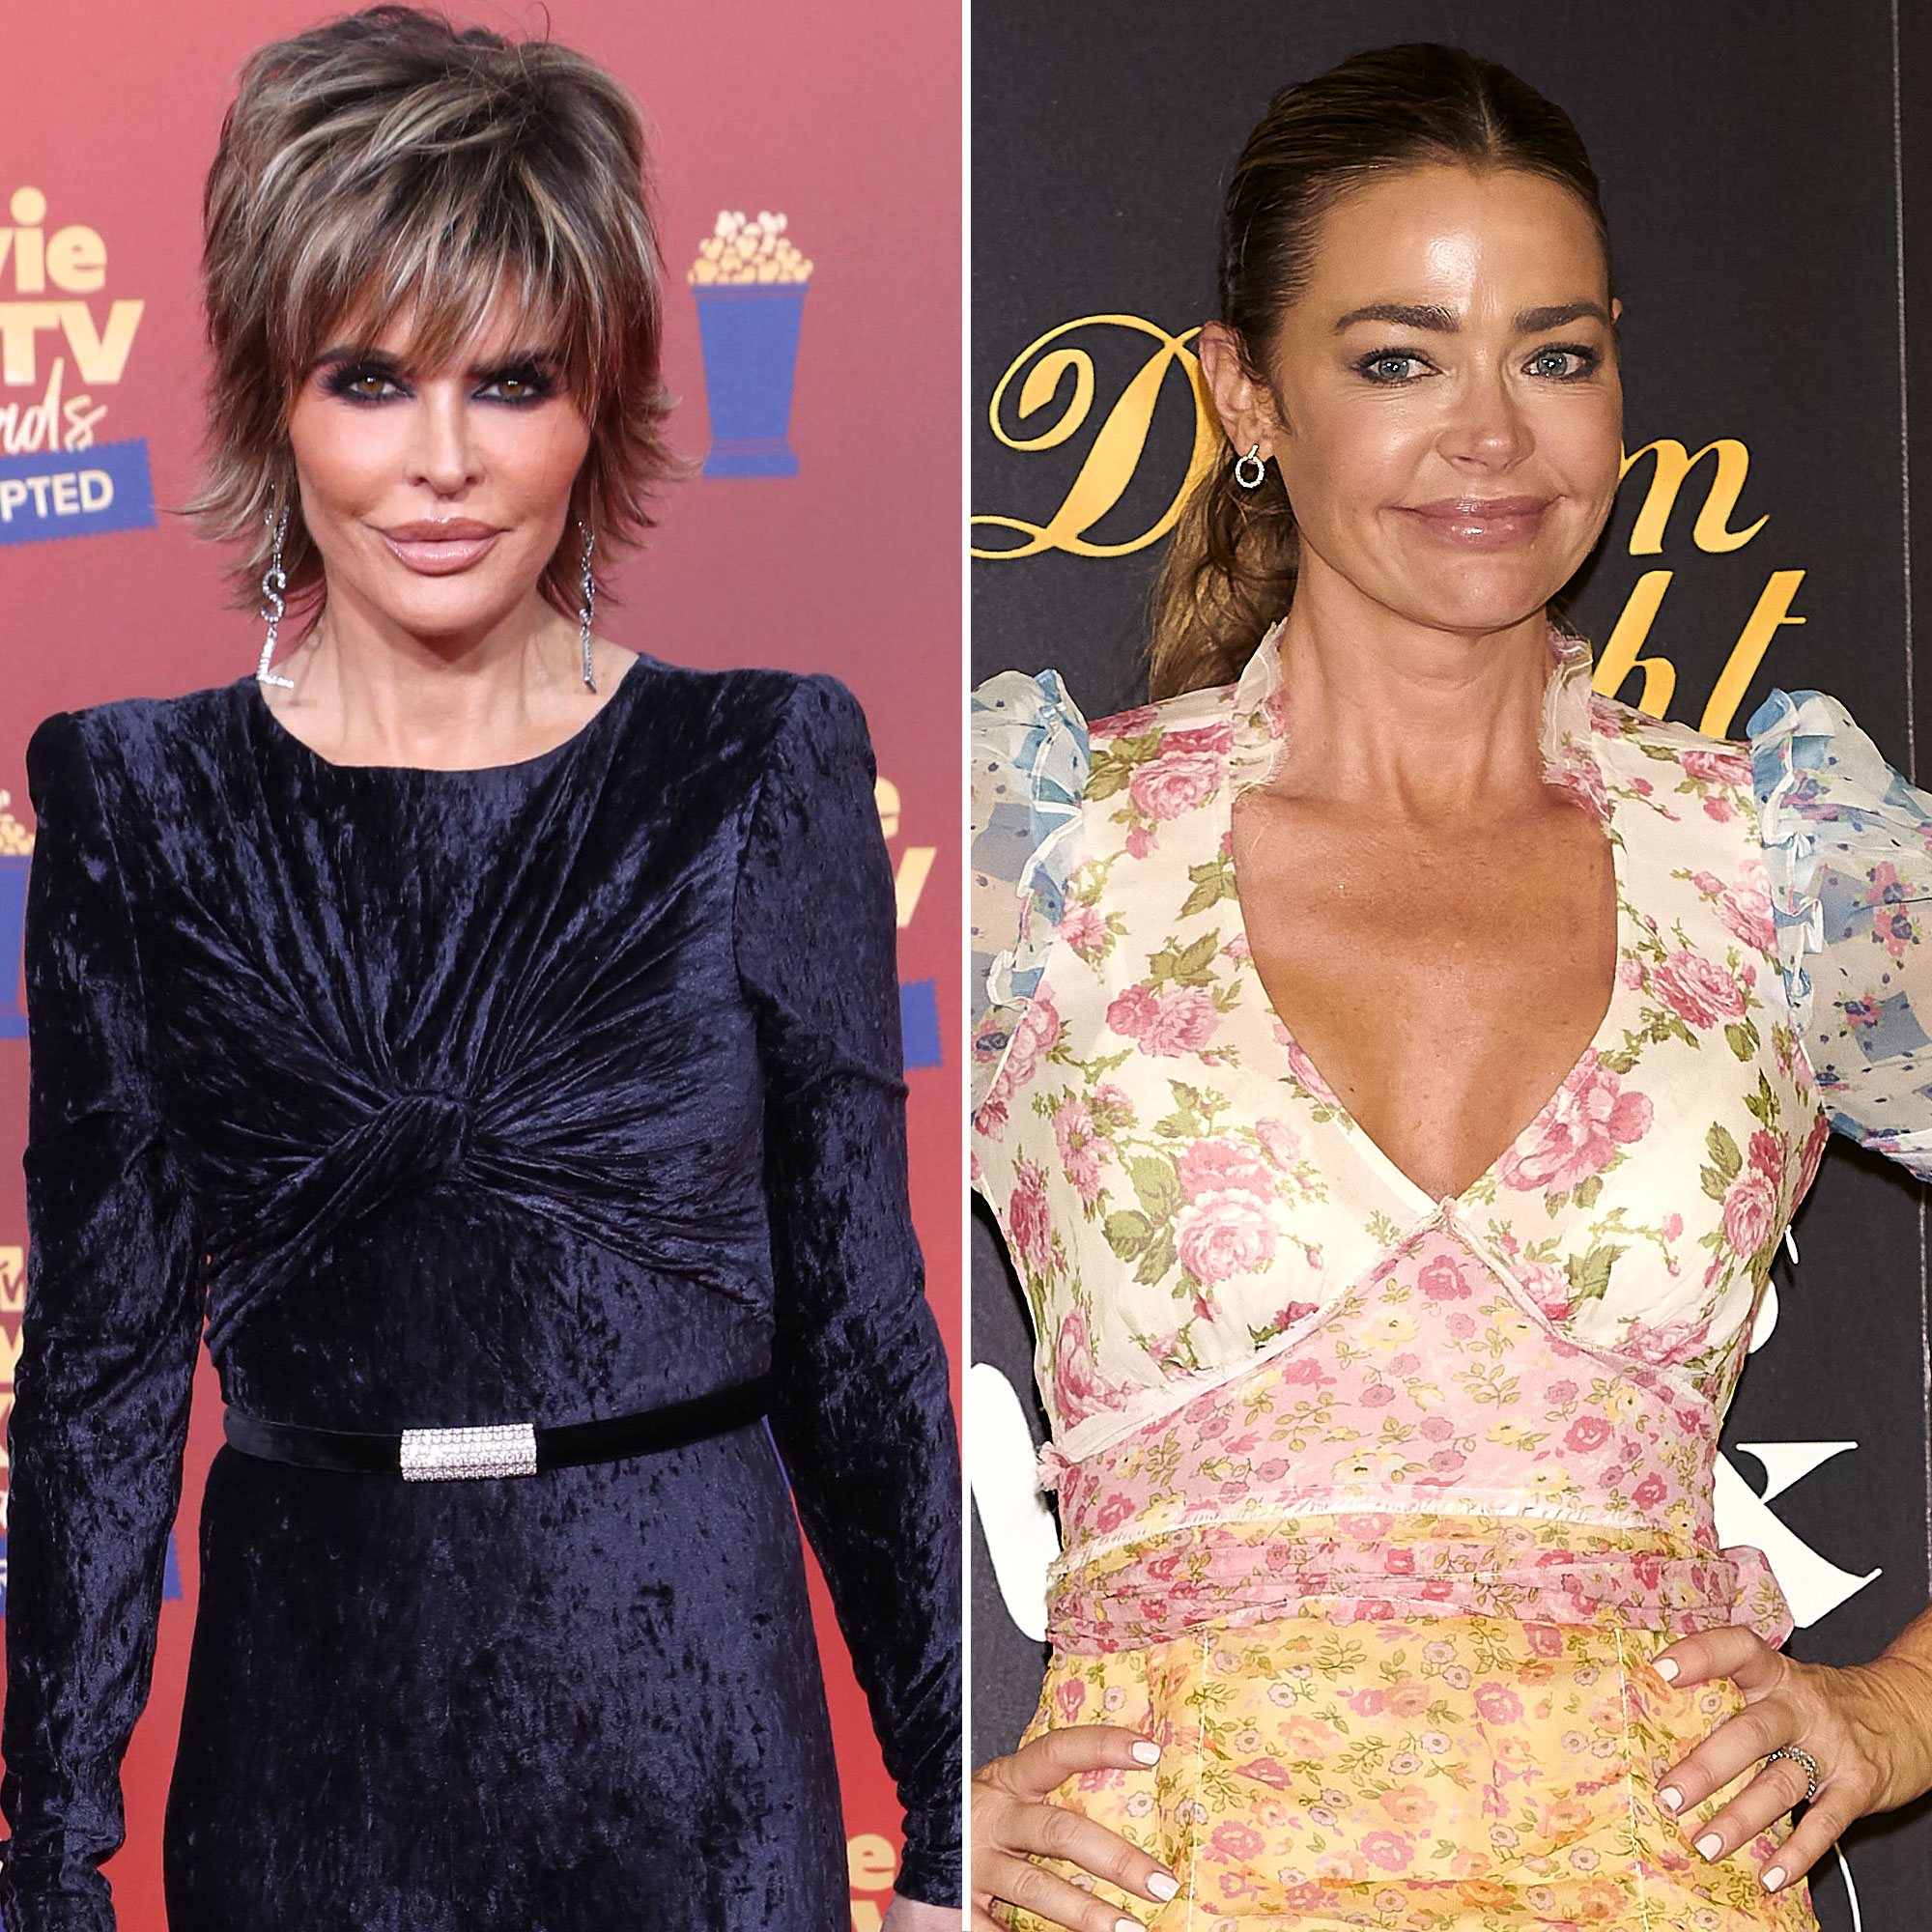 Lisa Rinna and More Housewives React to Denise Richards OnlyFans pic